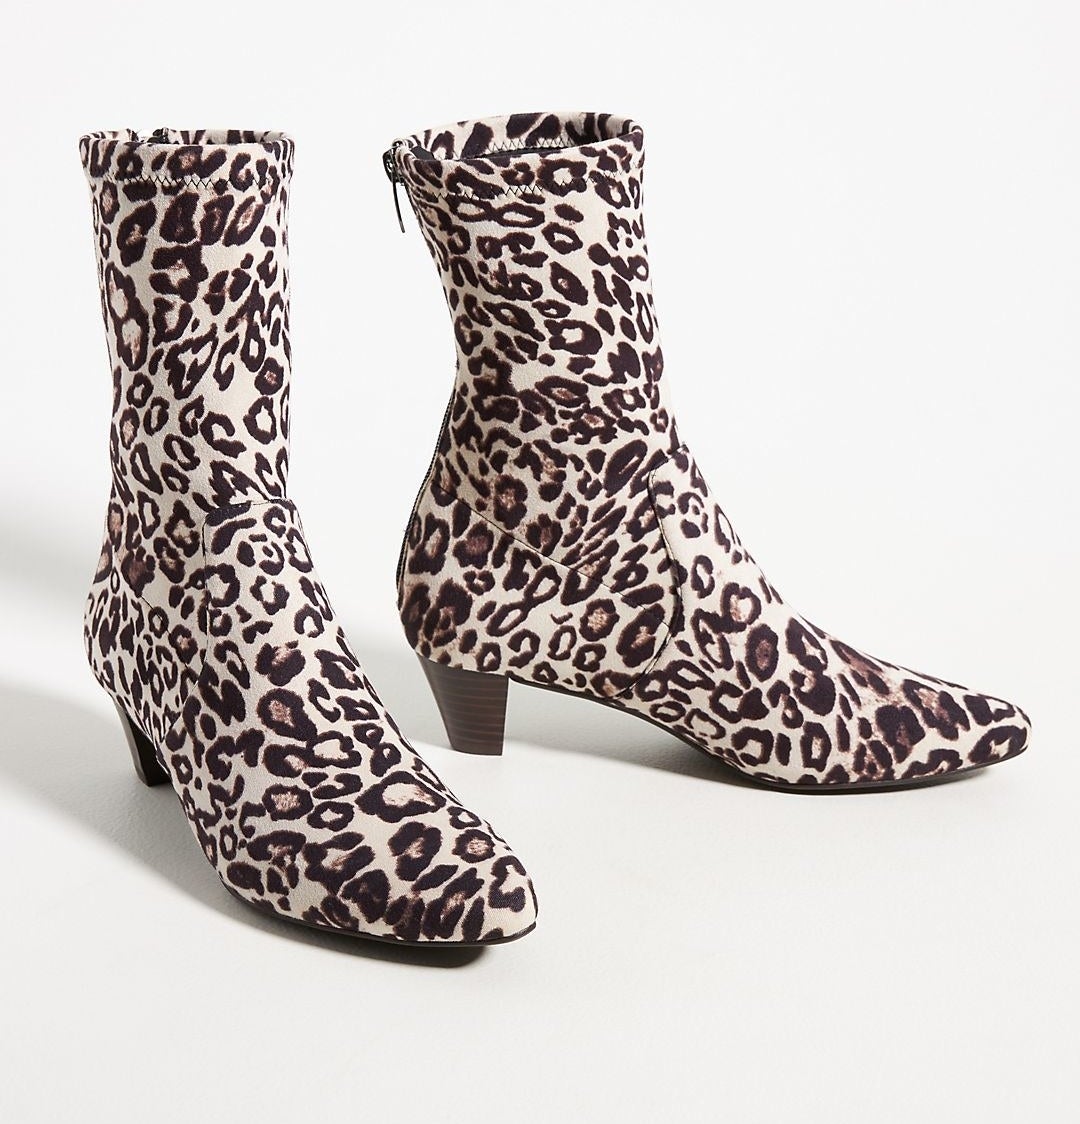 pointy toe cheetah boots with a small heel